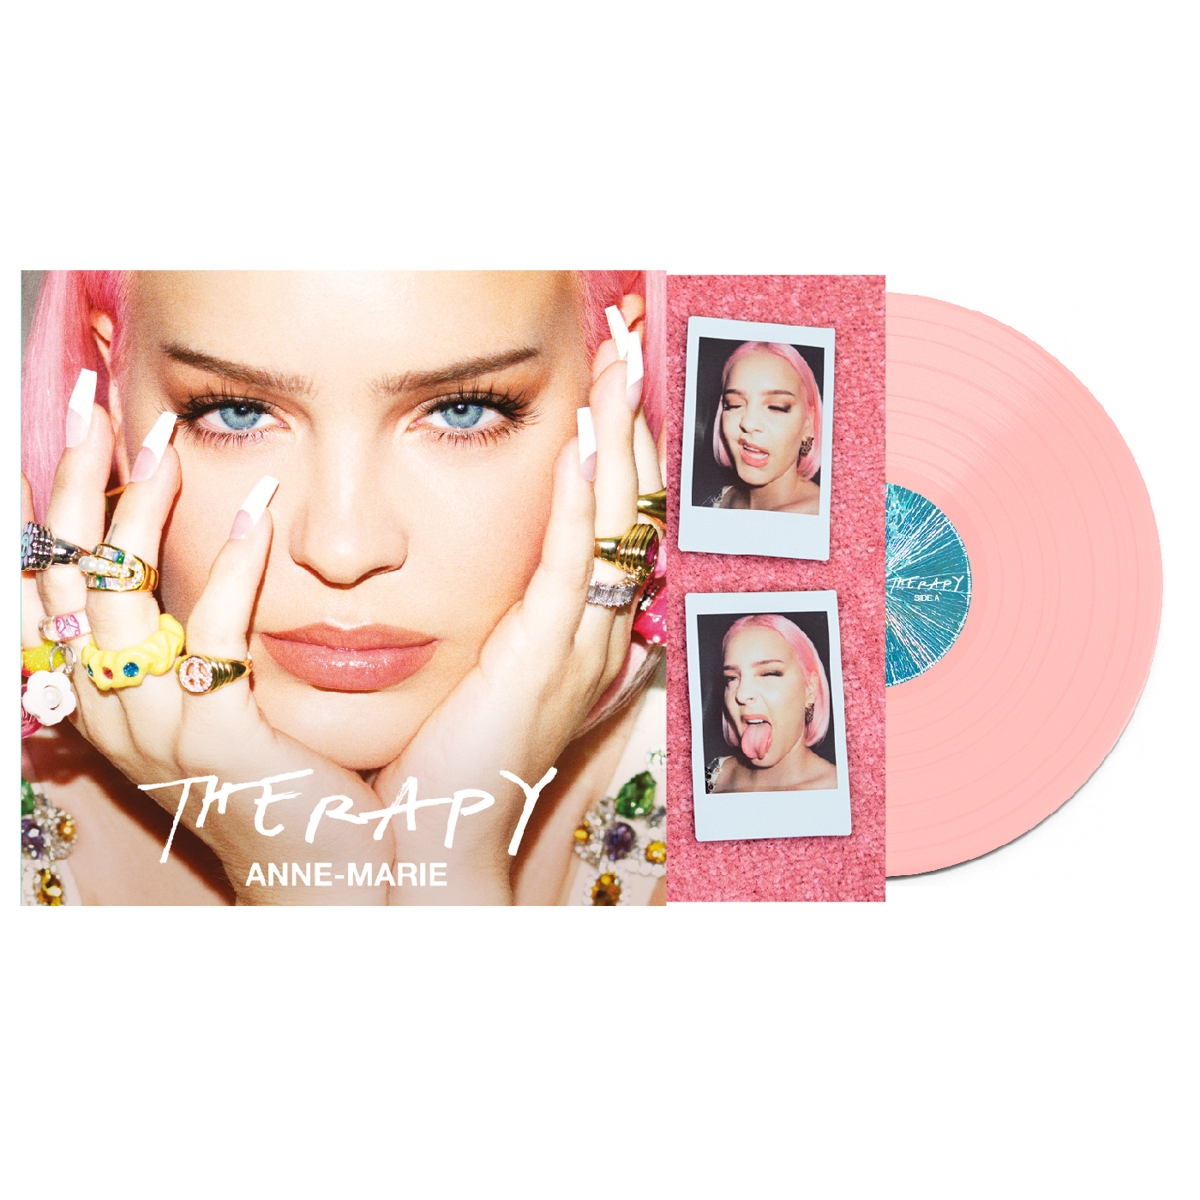 Anne-Marie - Therapy (Pink Vinyl)